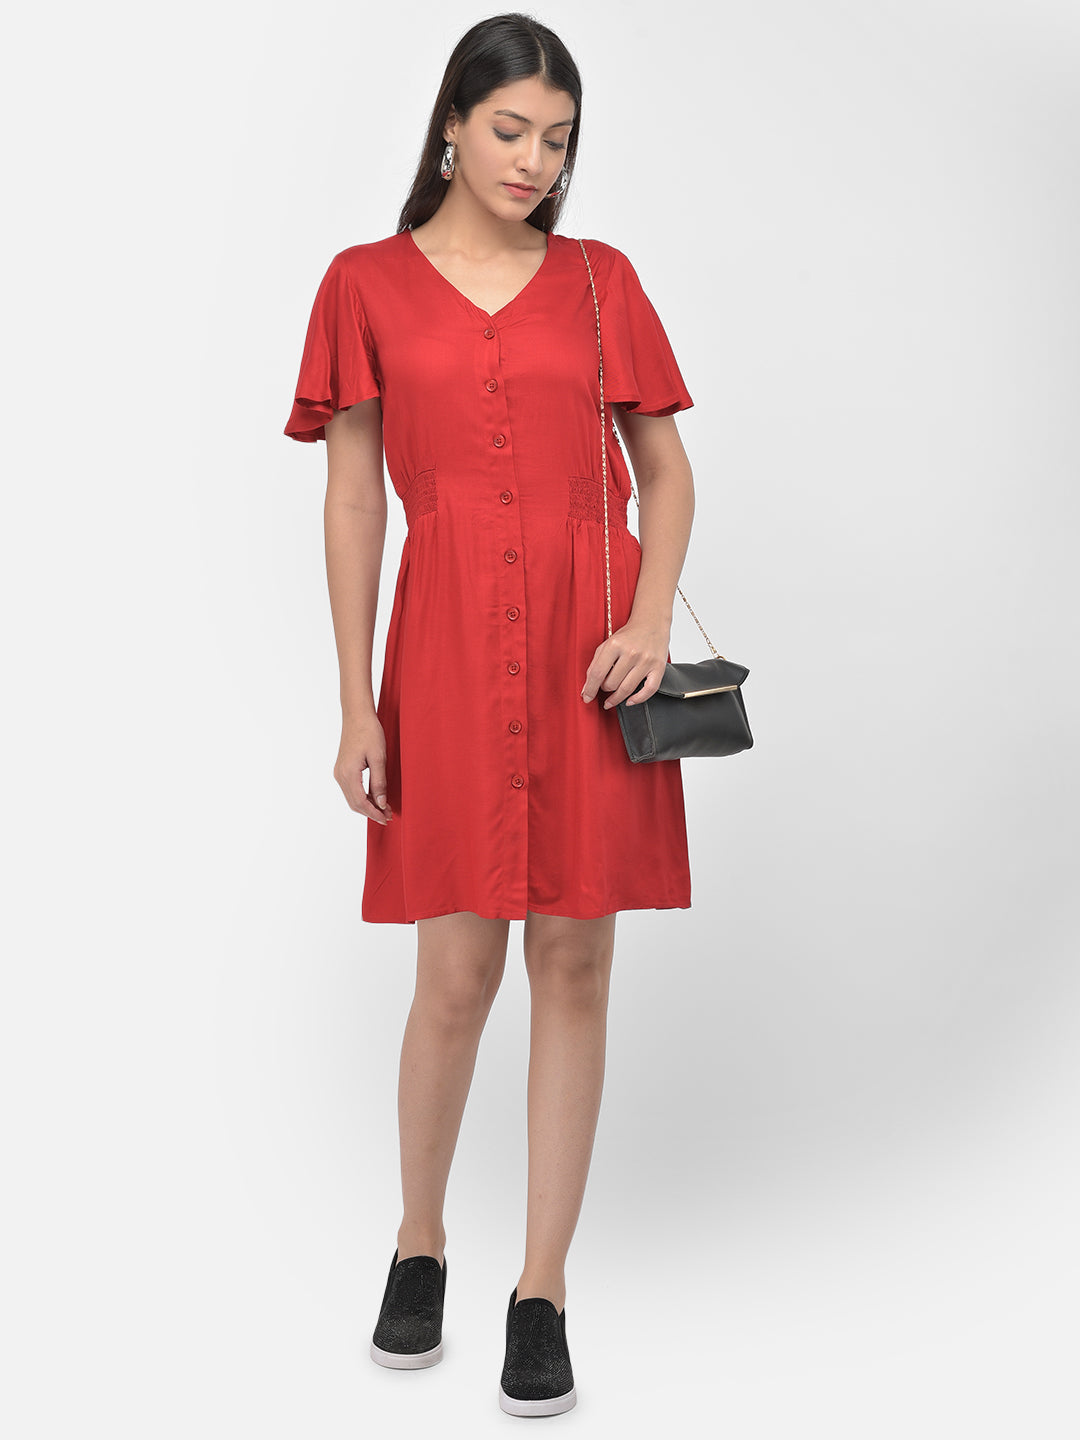 Red Half Sleeves A-Line Dress